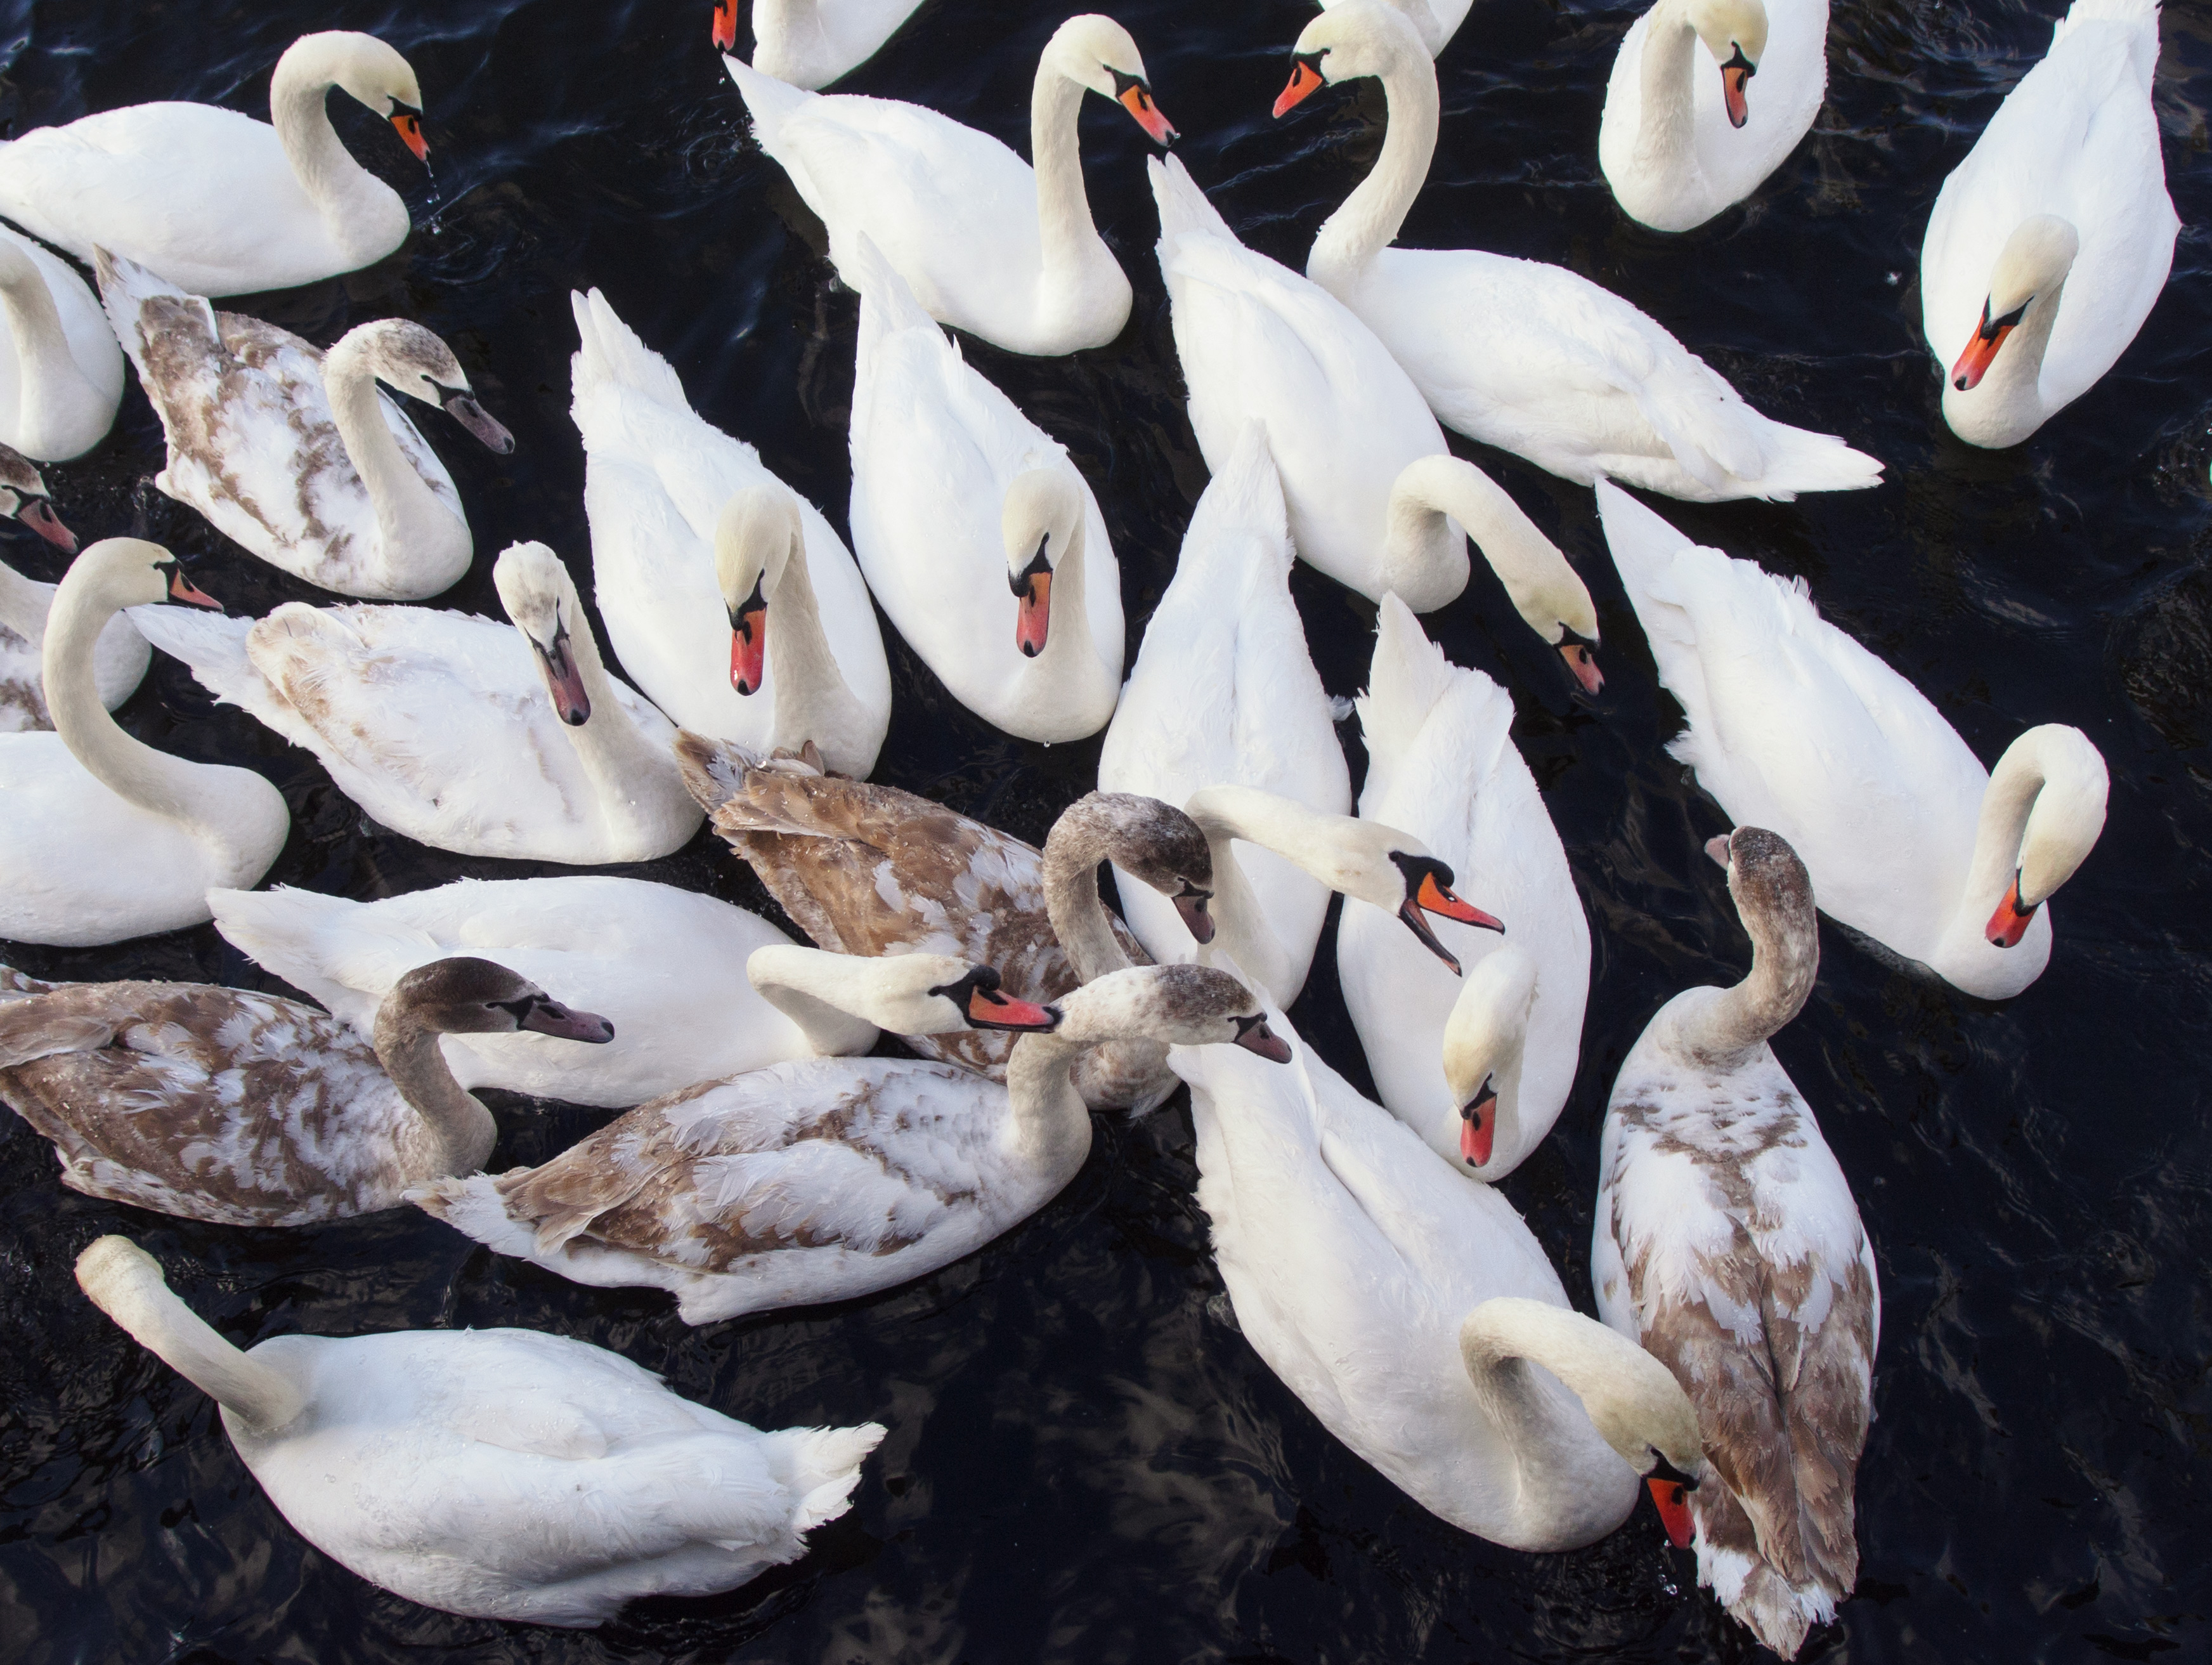 Free Image: Swans Fight For Food | Libreshot Public Domain Photos